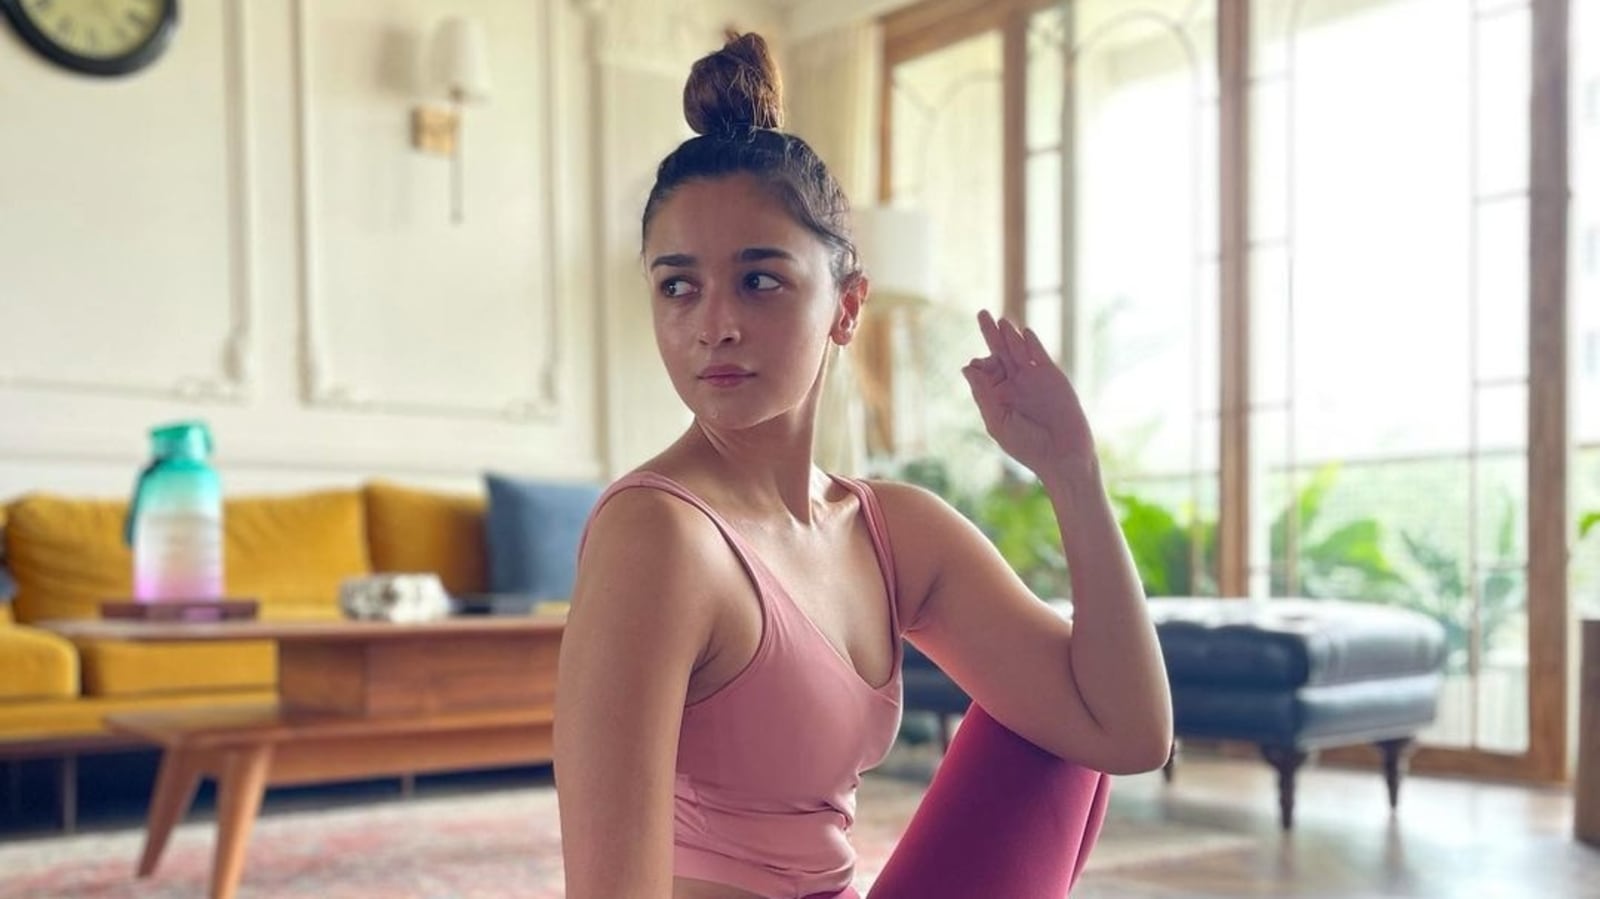 Alia Bhatt Doing Sex With A Wall With Toilet - Alia Bhatt gives sneak peek of her minimalistic home with stunning view  during yoga session | Bollywood - Hindustan Times